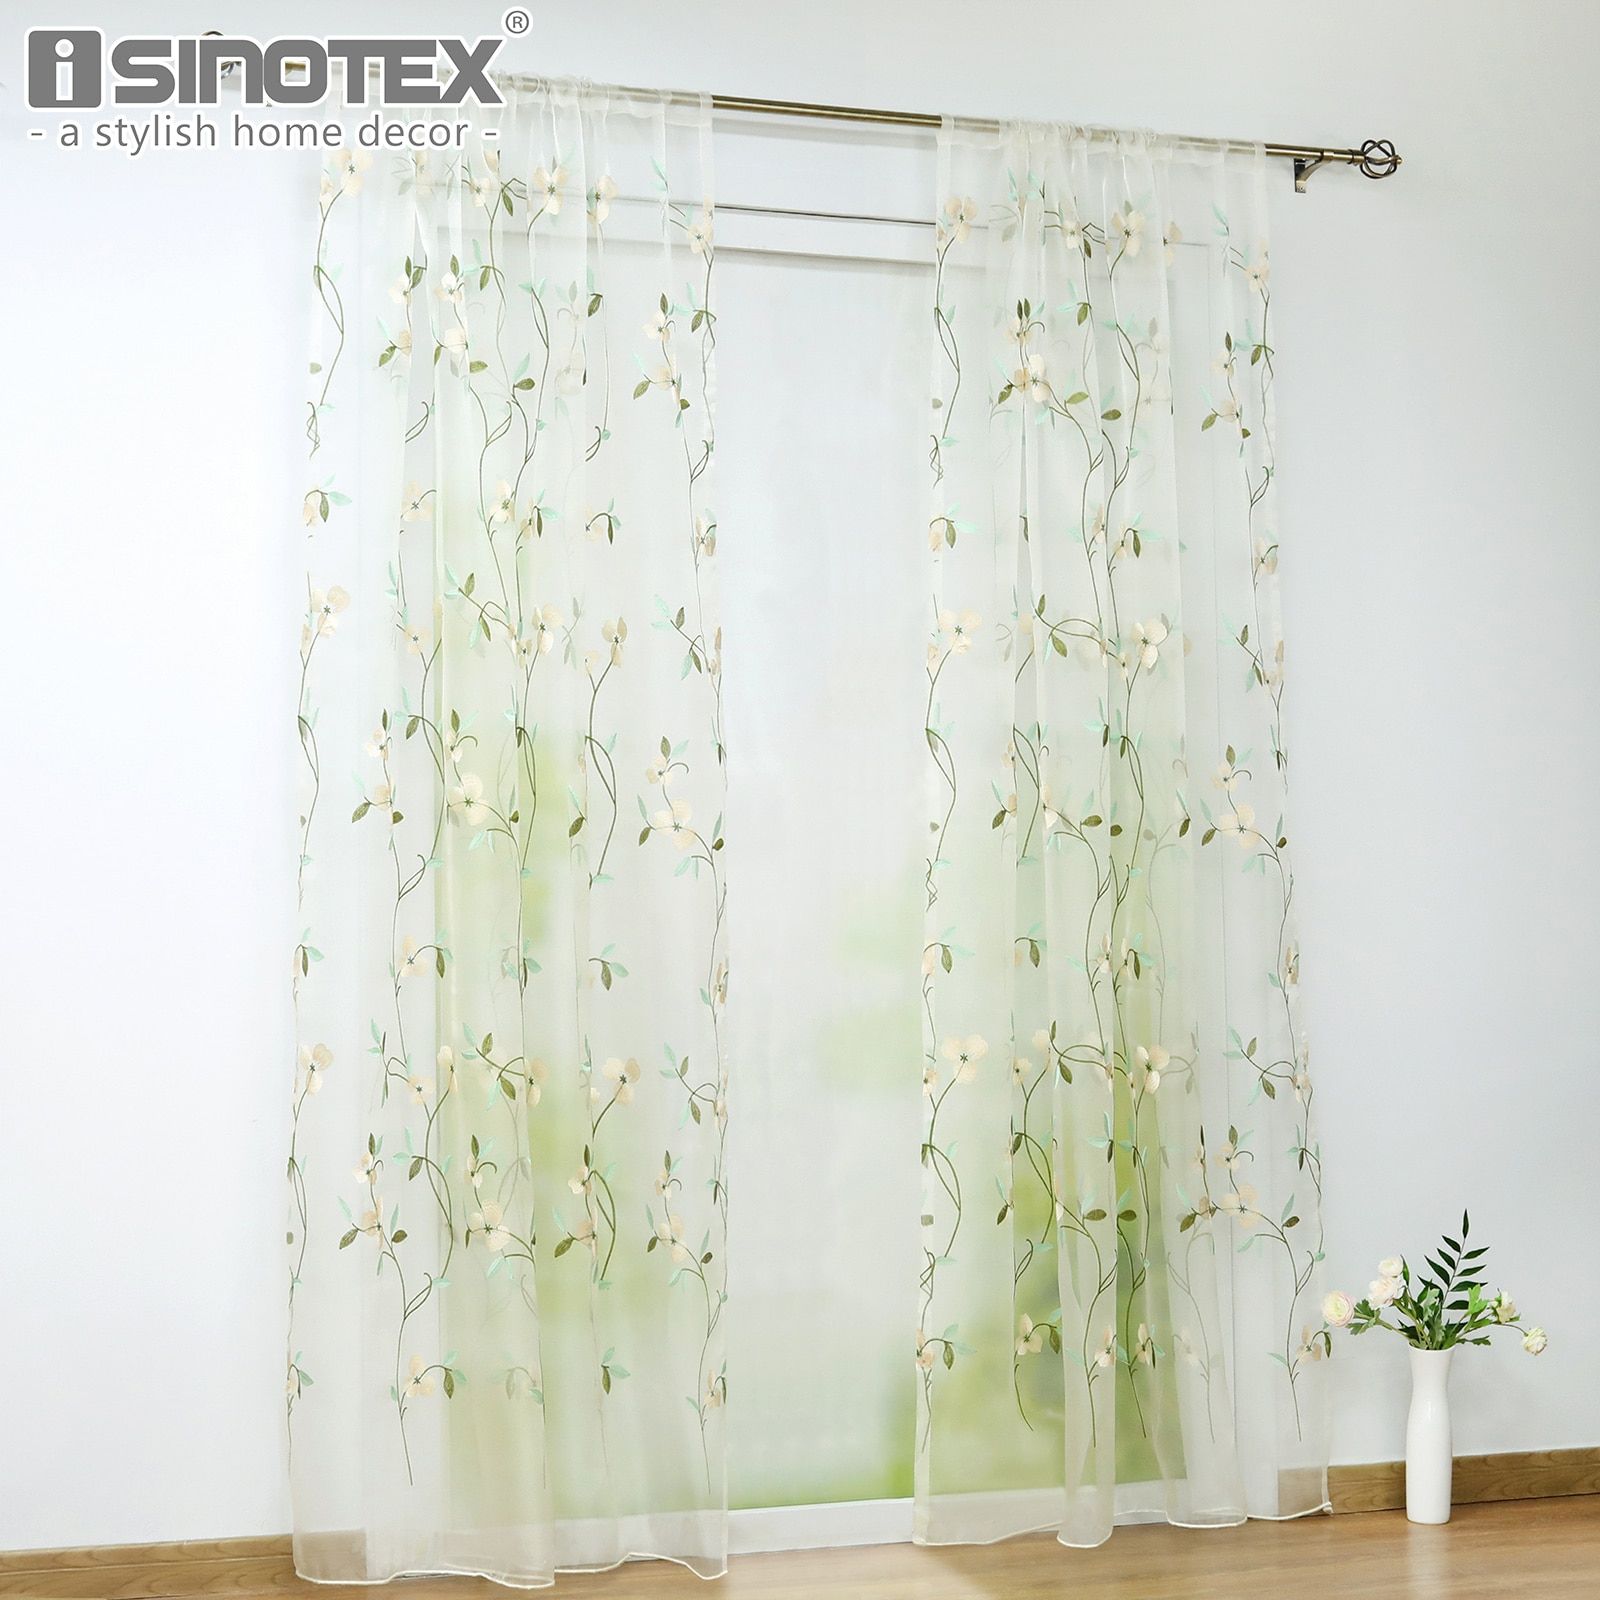 Us $12.19 |pastoral White Floral Embroidered Curtain Tulle Window Sheers  Panel Drapes For Kitchen Living Room Bedroom Decor Screening Sheer In With Embroidered Floral 5 Piece Kitchen Curtain Sets (Photo 10 of 20)